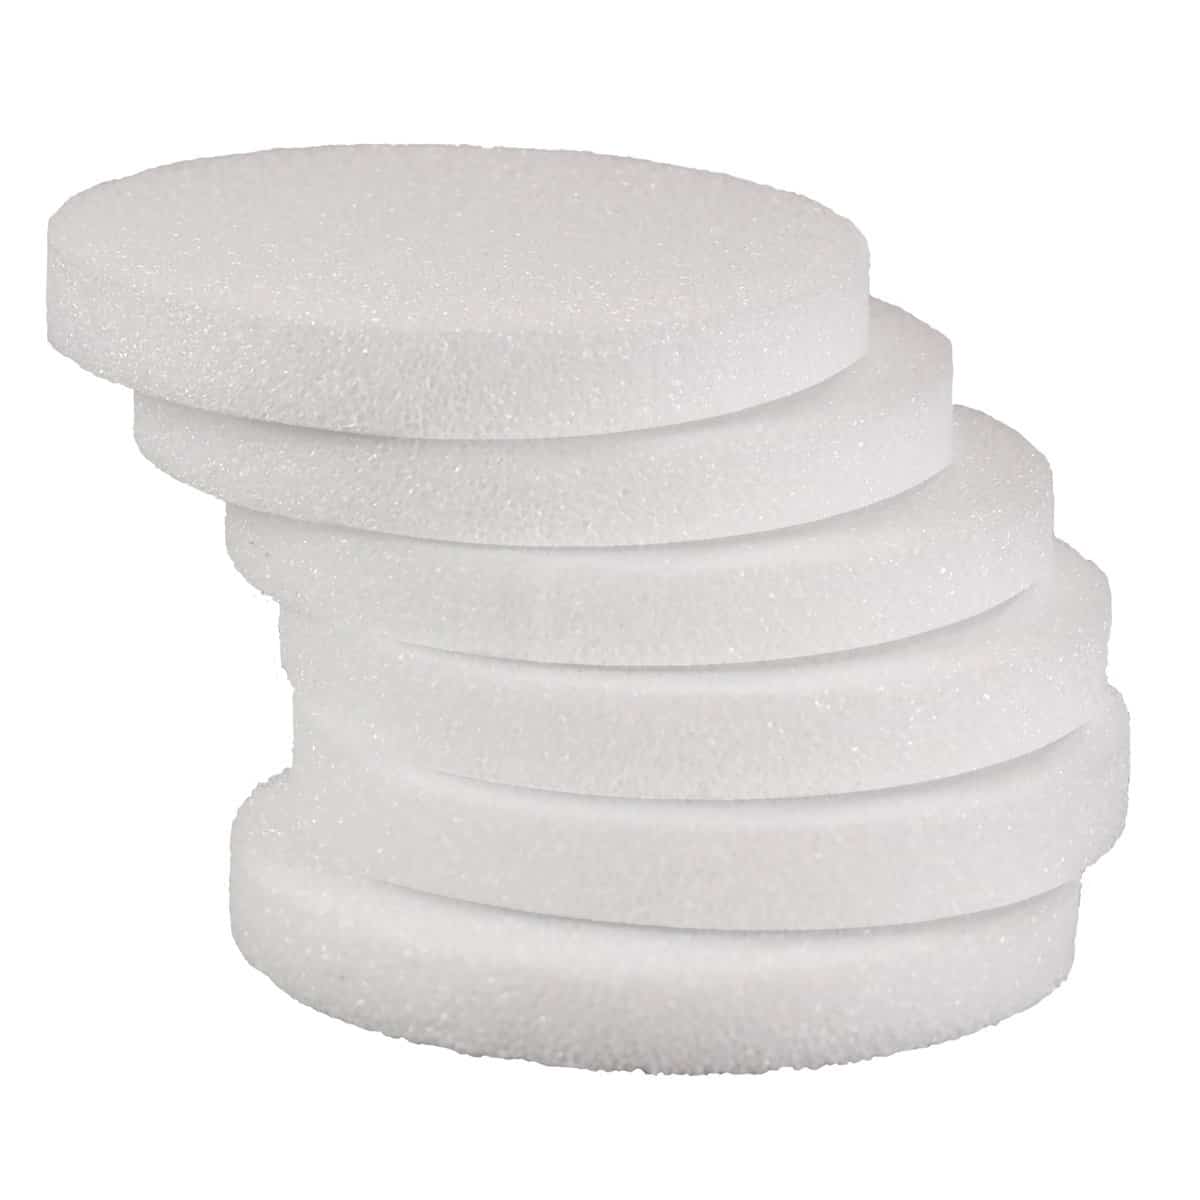 12 Pack Foam Circles For Crafts - 6 Inch Round Cake Dummy Discs For DIY  Projects (1 Inch Thick, White)